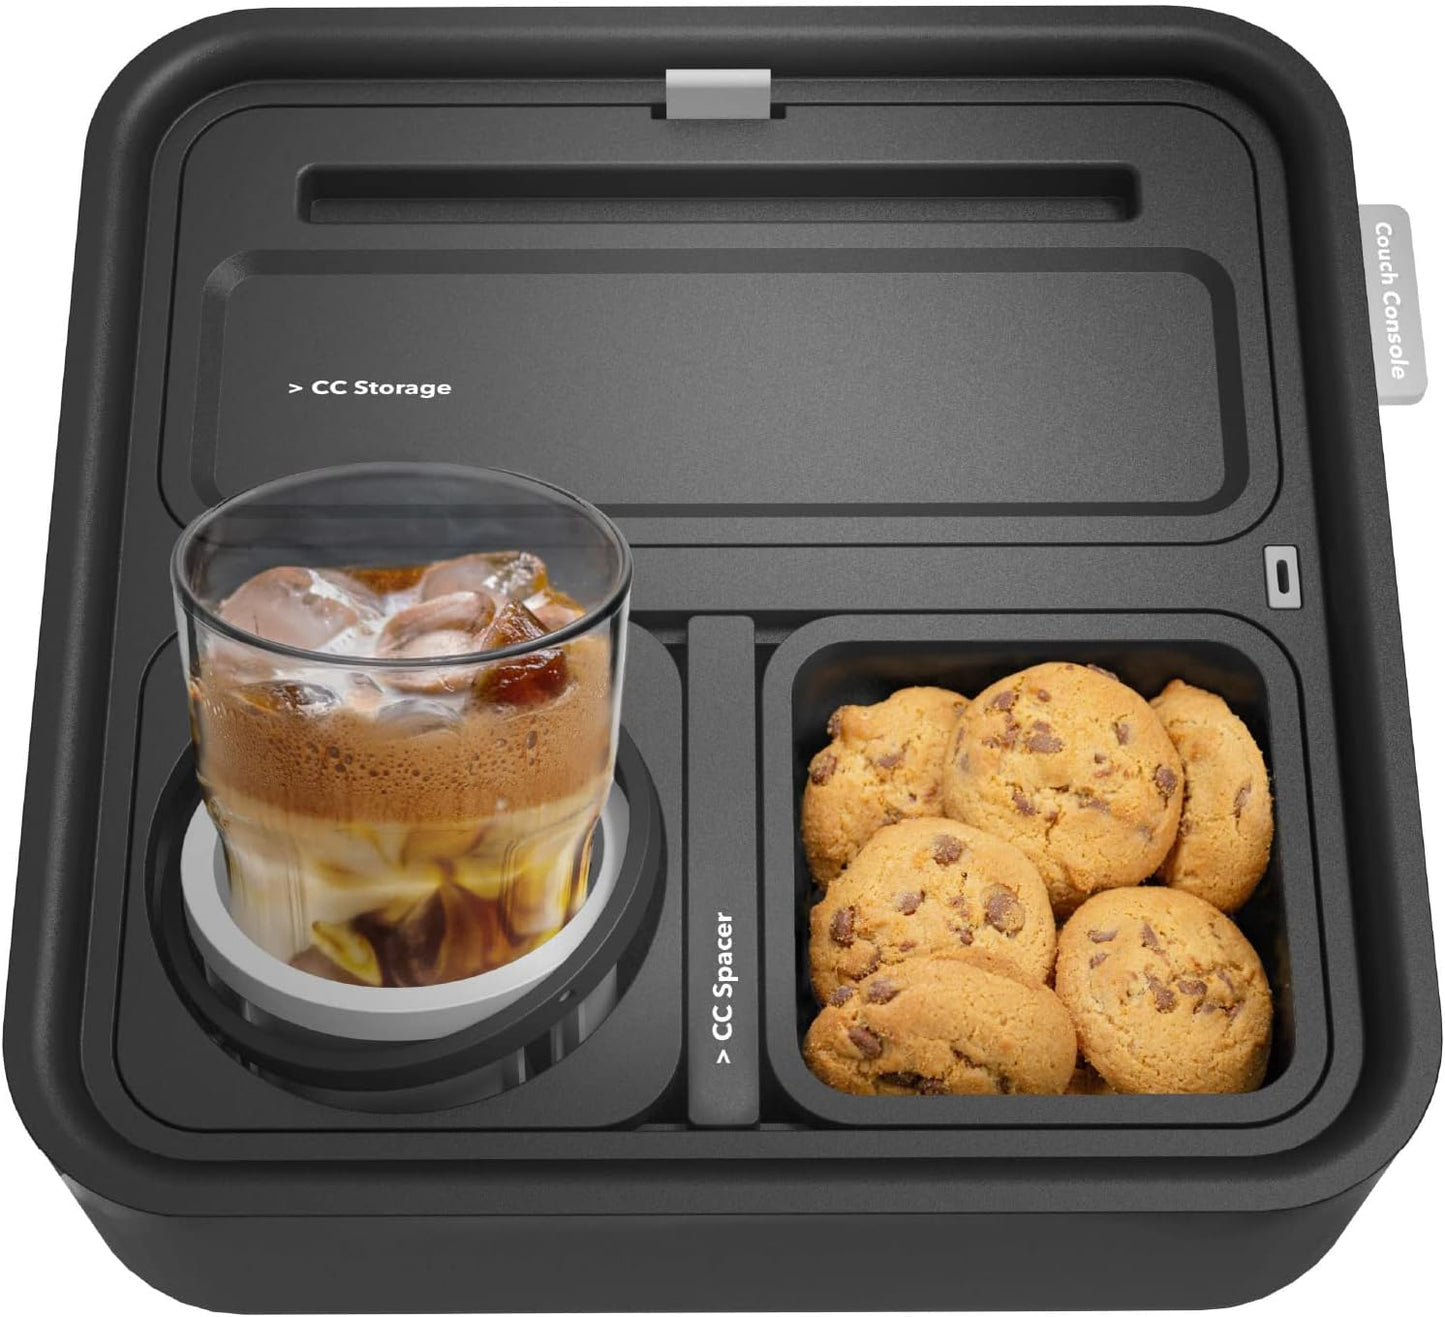 Original Cup Holder Tray - Drinks & Snacks Sofa Caddy with Armrest, Table with Phone Stand- TV Remote Control Storage and Organizer - for Living Rooms, RV, and Cars, Black/Gray